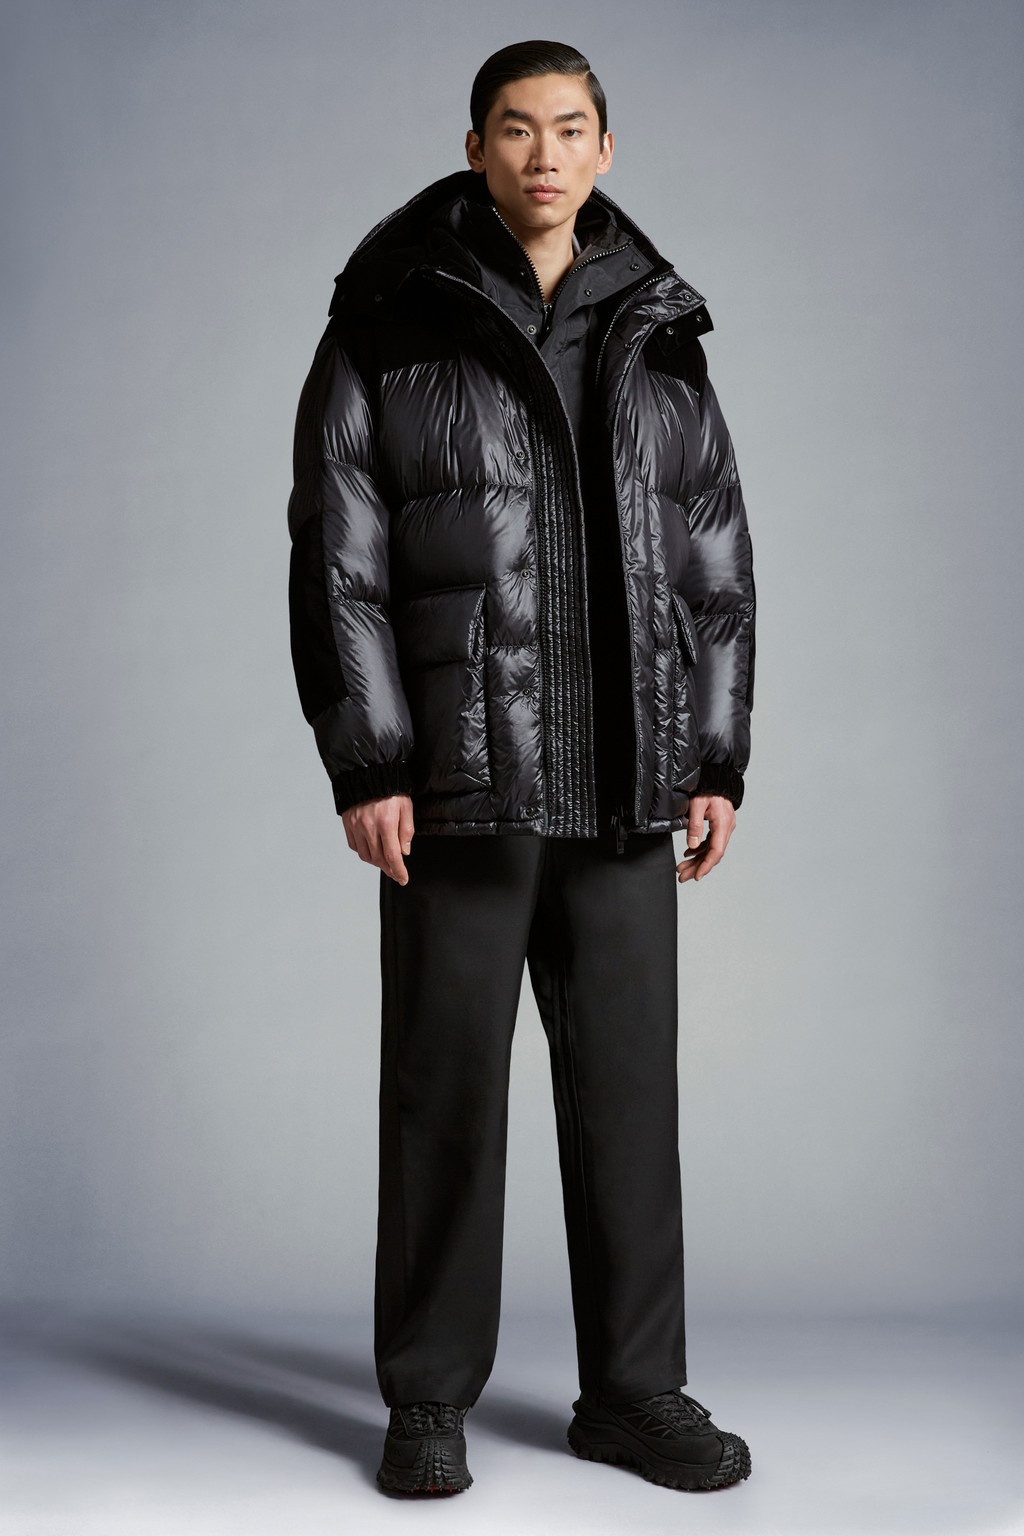 For Special Projects - Moncler x Sacai | Moncler HK